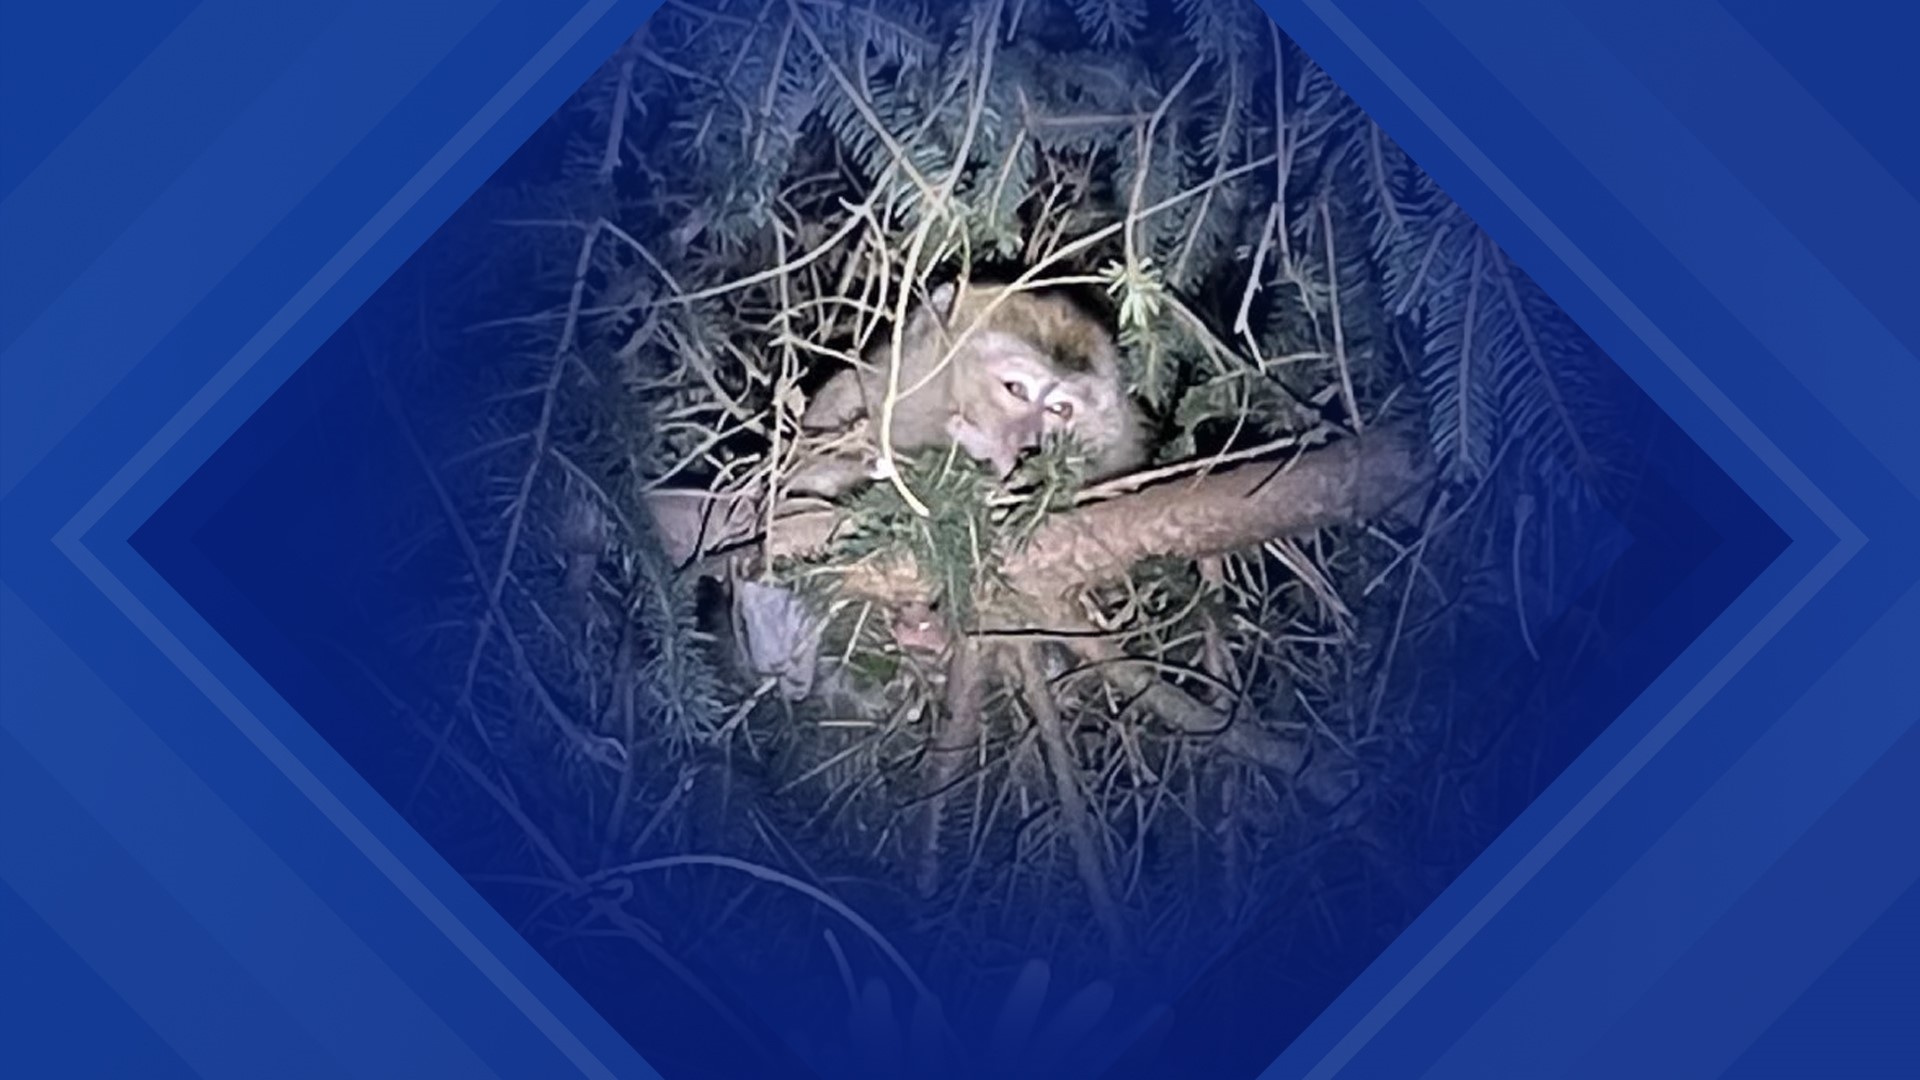 A woman who had a close encounter with a monkey after the crash near Danville on Friday now tells Newswatch 16 she did experience cold-like symptoms.